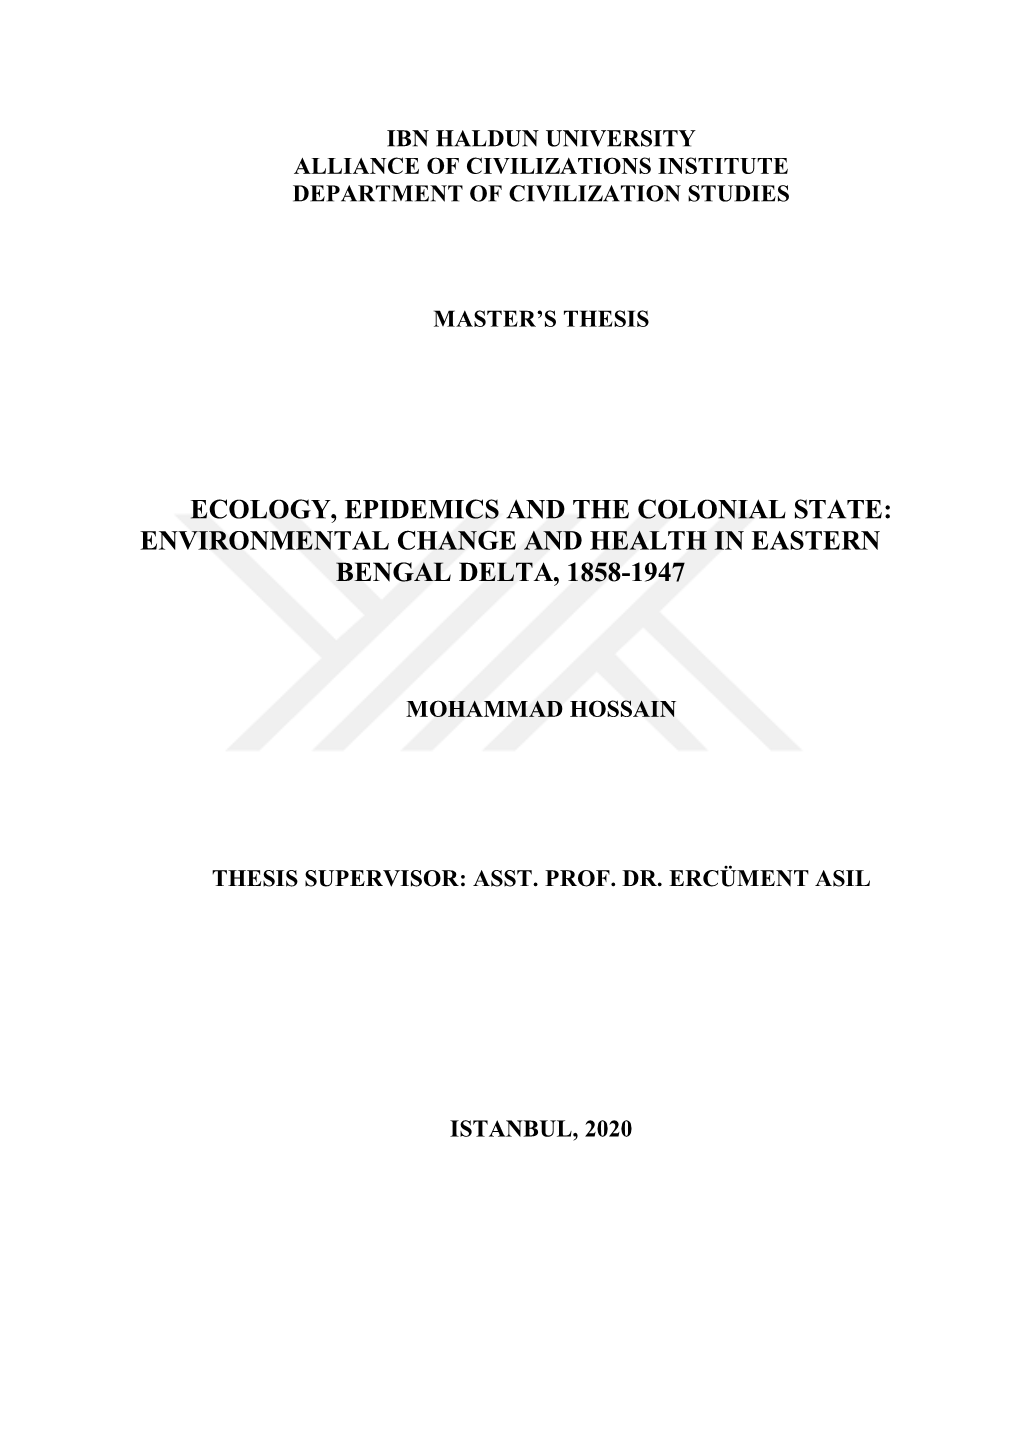 Environmental Change and Health in Eastern Bengal Delta, 1858-1947